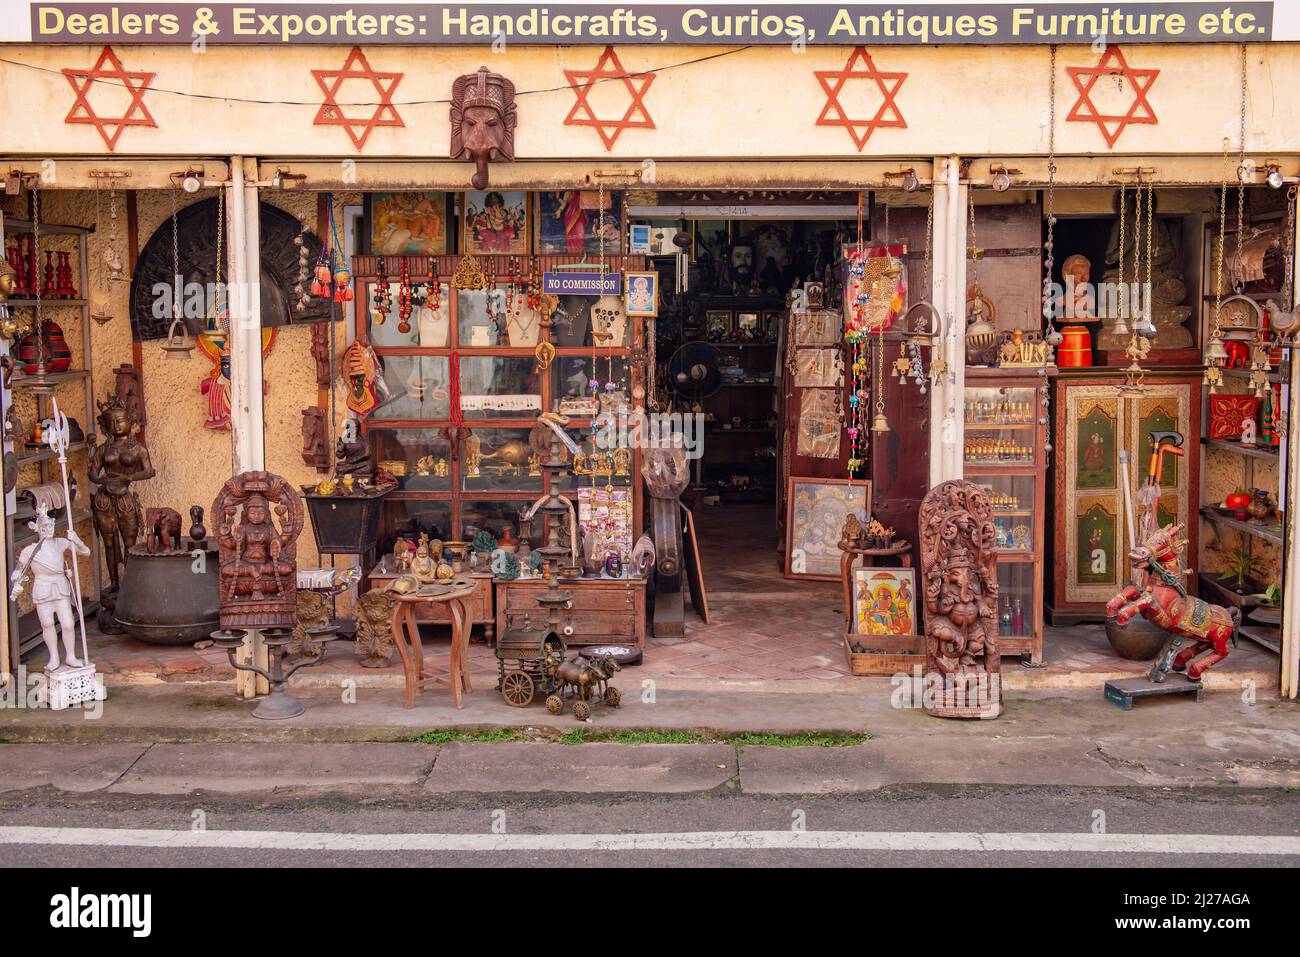 Kochi, India - January 16, 2017: Heritage art store and historic place in Mattancherry district, Cochin. Kerala travel destinations Stock Photo